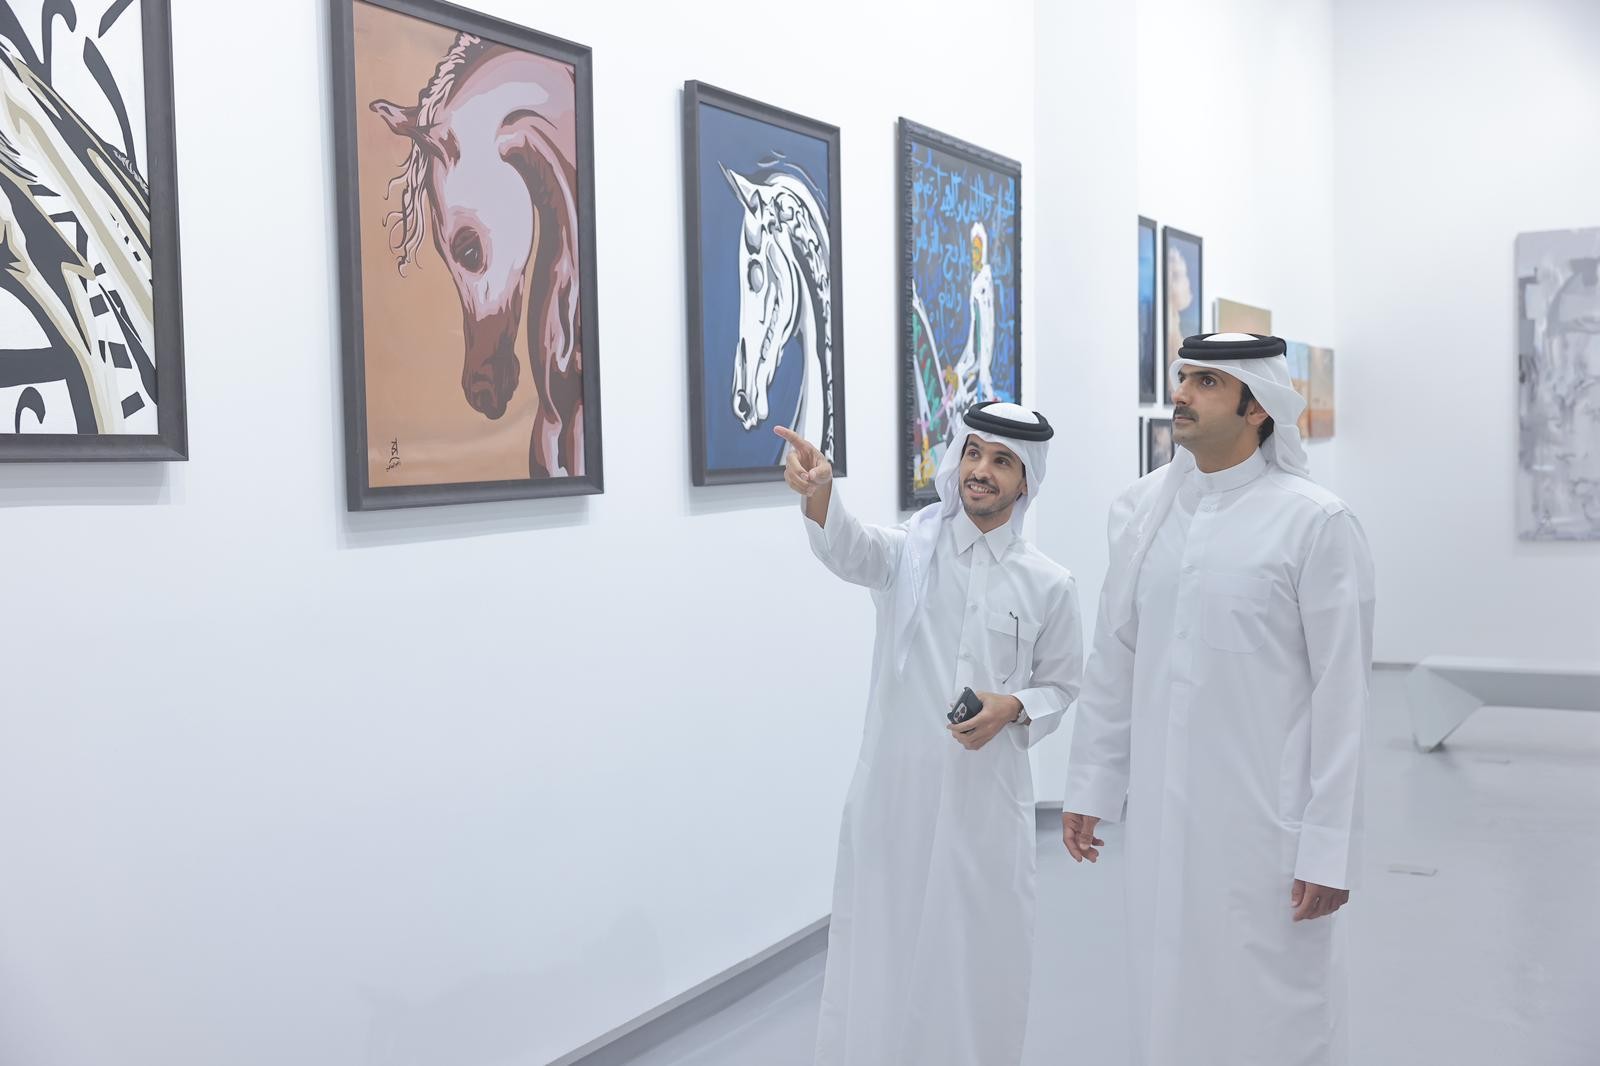 Minister of Culture Inaugurates "A M Gallery" in Lusail City